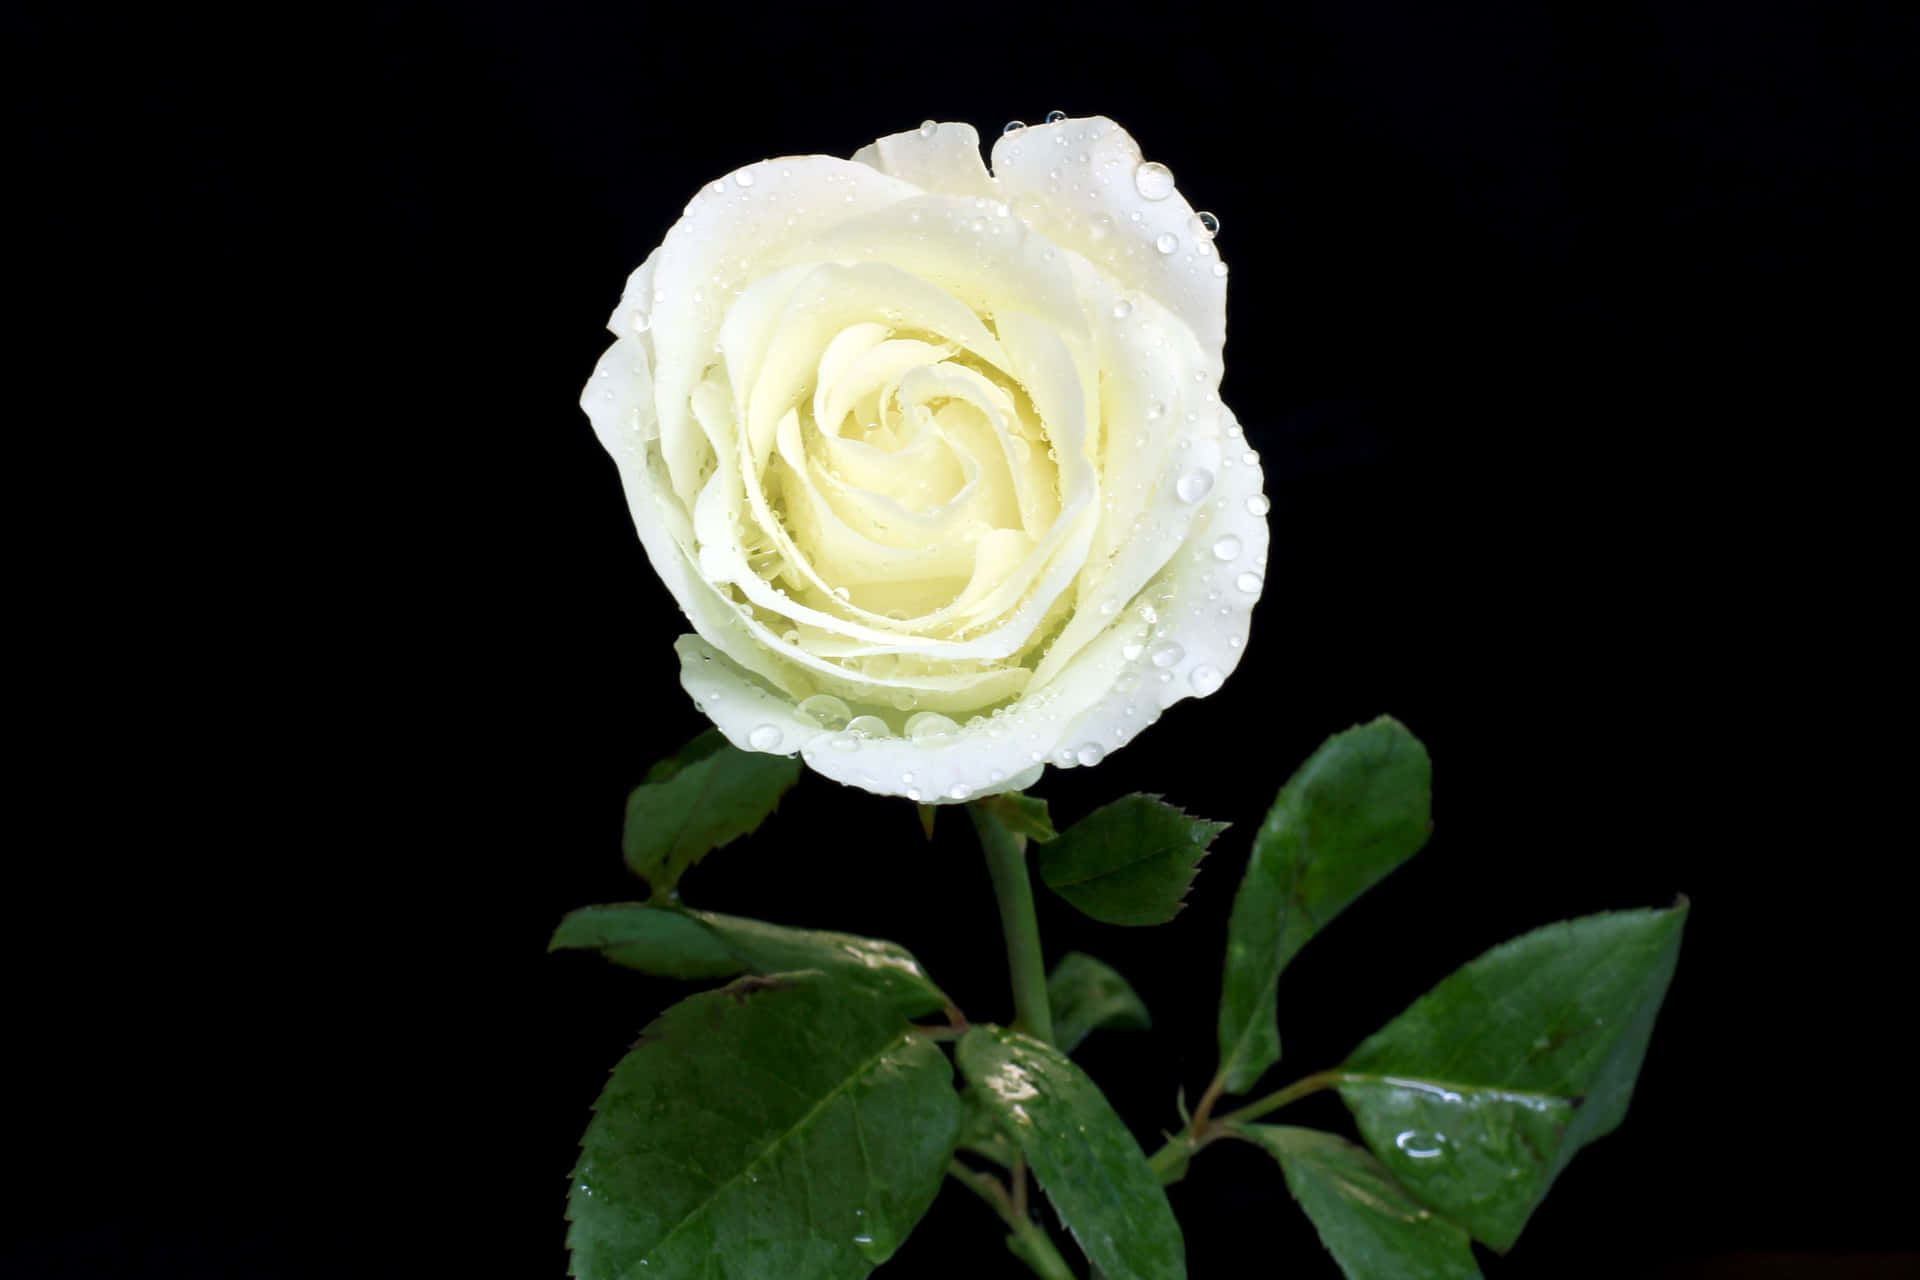 Free White Rose Wallpaper Downloads, [200+] White Rose Wallpapers for FREE  